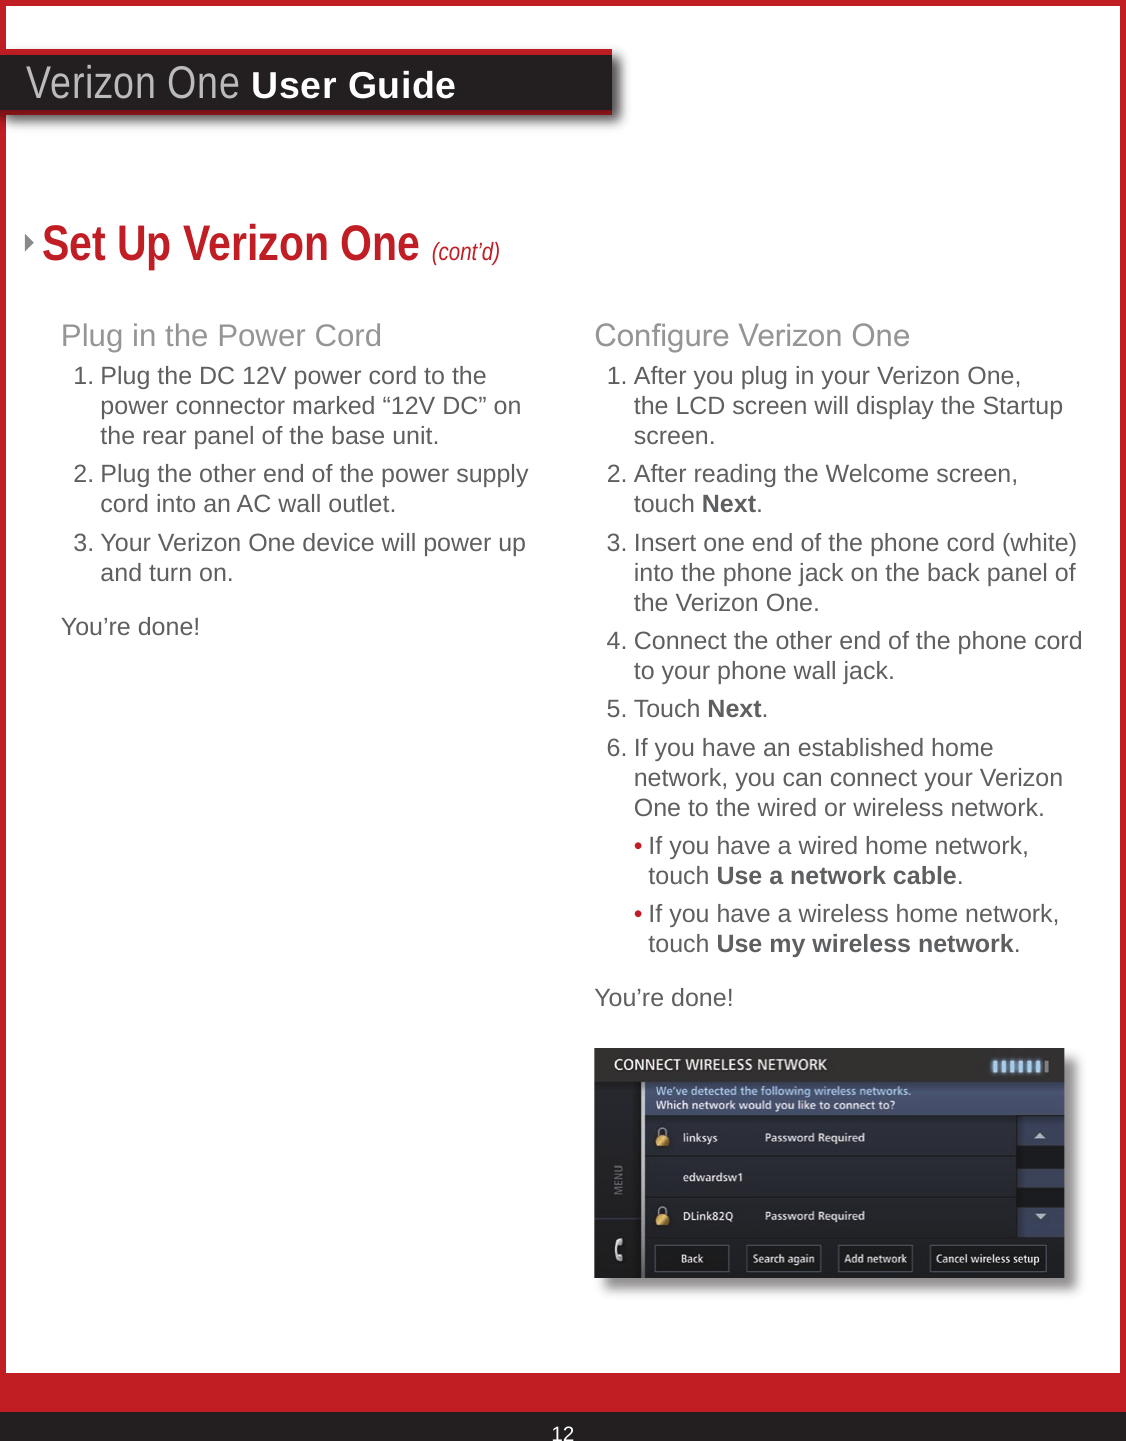 © 2007 Verizon. All Rights Reserved. 12Verizon One User GuideSet Up Verizon One (cont’d)Plug in the Power Cord  1. Plug the DC 12V power cord to the      power connector marked “12V DC” on      the rear panel of the base unit.   2. Plug the other end of the power supply      cord into an AC wall outlet.  3. Your Verizon One device will power up      and turn on.You’re done!Congure Verizon One  1. After you plug in your Verizon One,      the LCD screen will display the Startup      screen.  2. After reading the Welcome screen,       touch Next.  3. Insert one end of the phone cord (white)      into the phone jack on the back panel of      the Verizon One.   4. Connect the other end of the phone cord      to your phone wall jack.  5. Touch Next.   6. If you have an established home        network, you can connect your Verizon      One to the wired or wireless network.    • If you have a wired home network,        touch Use a network cable.     • If you have a wireless home network,        touch Use my wireless network.You’re done!